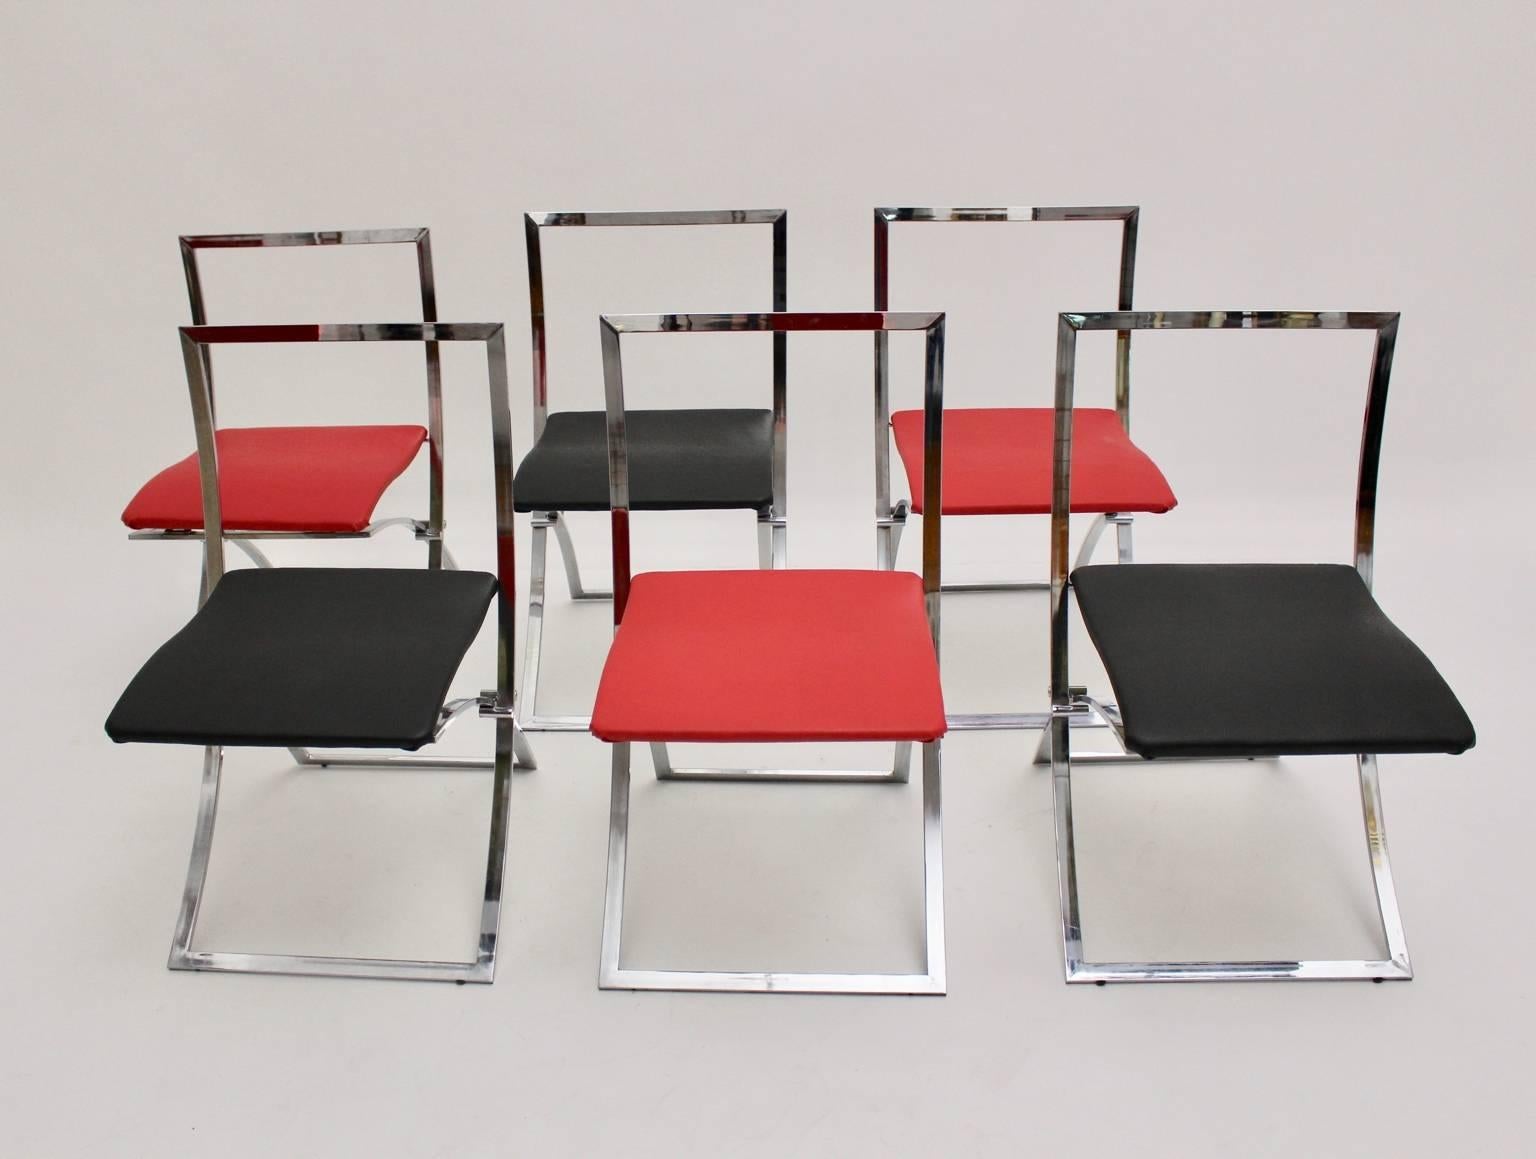 Mid Century Modern vintage dining chairs model Luisa designed by the Italian architect Marcello Cuneo, 1970, Italy and executed by Mobel.
The foldable dining chairs appears elegant and timeless. 
The base is chrome-plated.  Three chairs are provided